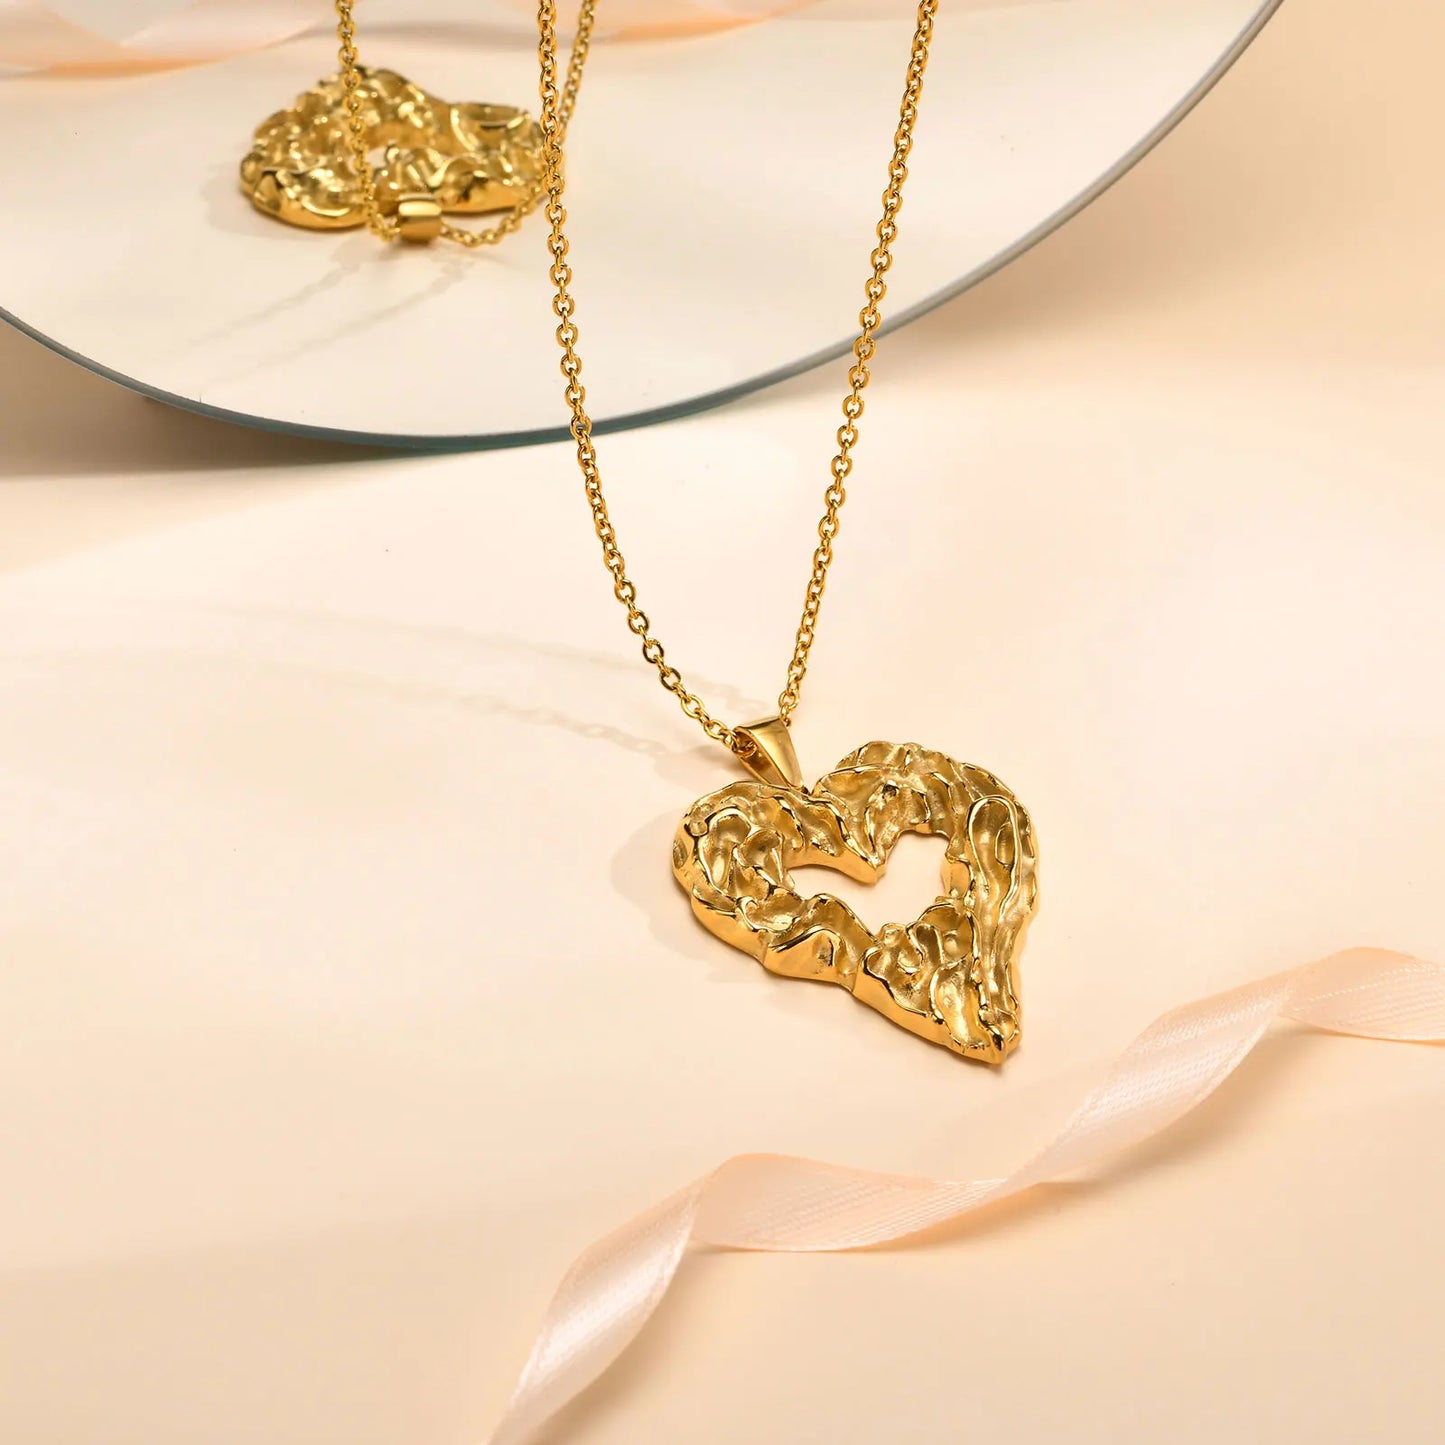 Exaggerated Oversize Heart Necklaces, Irregular Hammered Heart Pendant